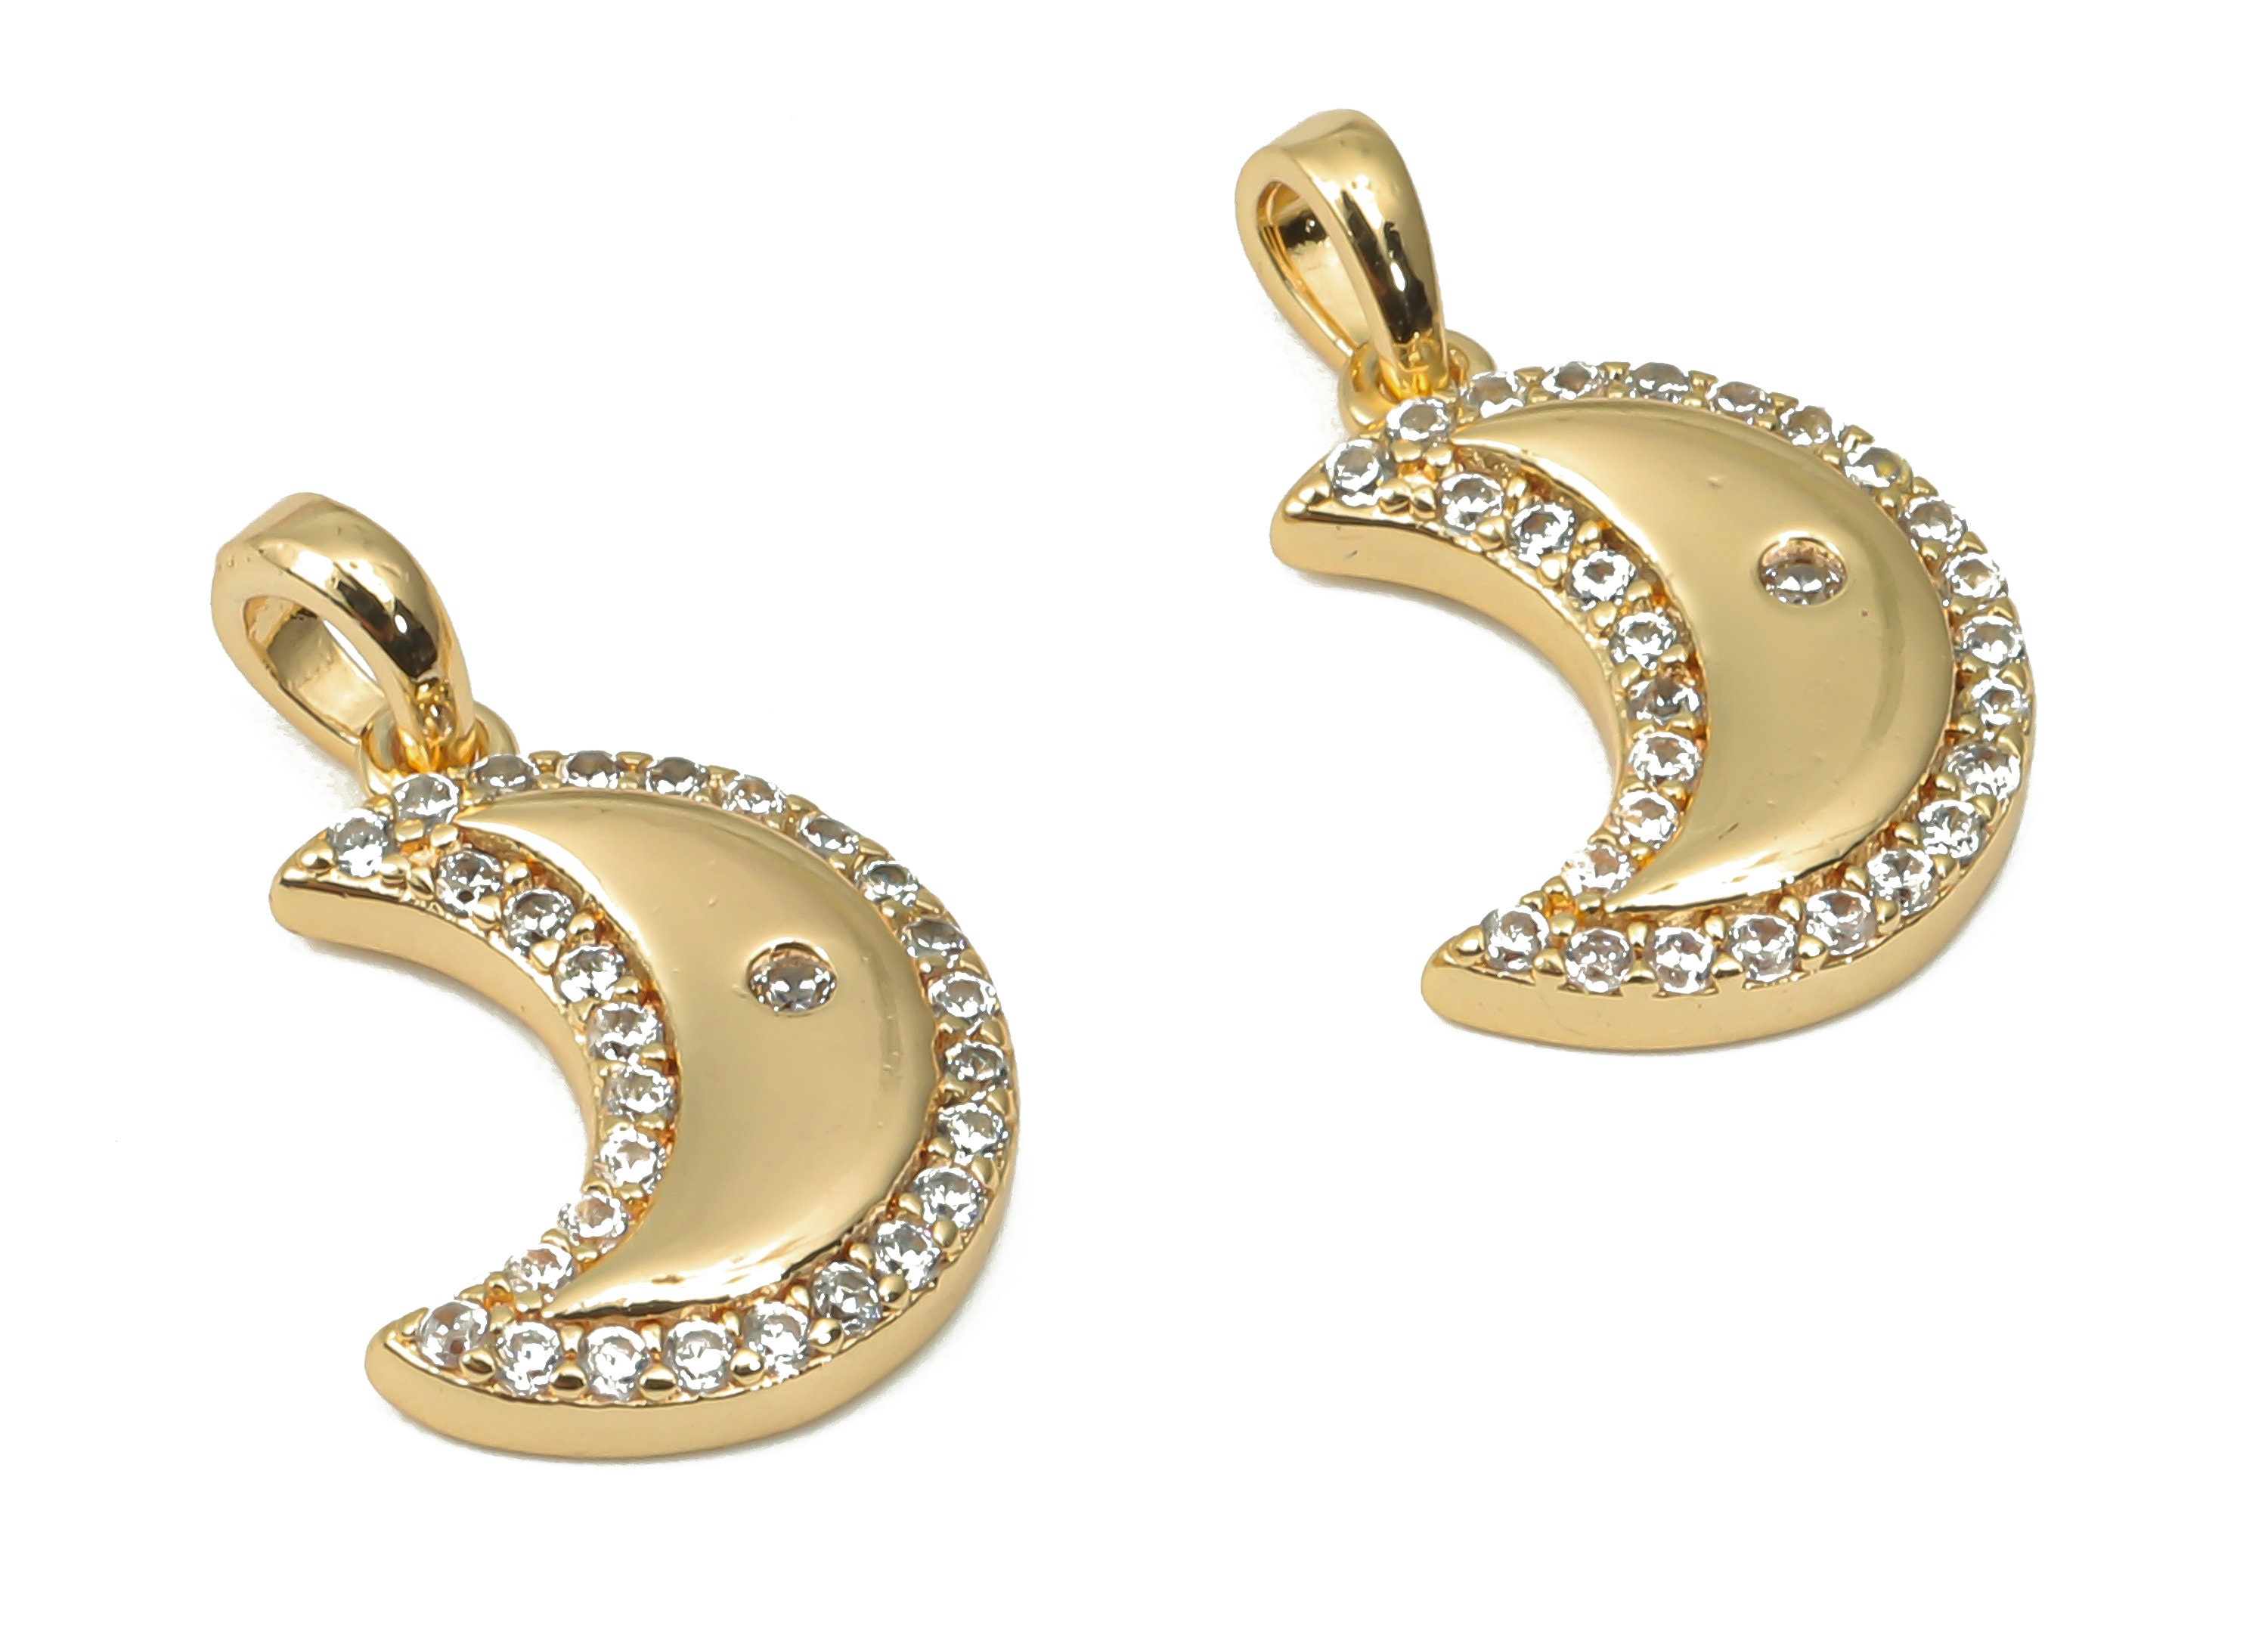 Gold Moon Pendant RGP4423 Jewelry Supplies 18K Real Gold Plated Brass Brass Crescent Earring Charms with Zircons 12.88x9.31x2.2mm